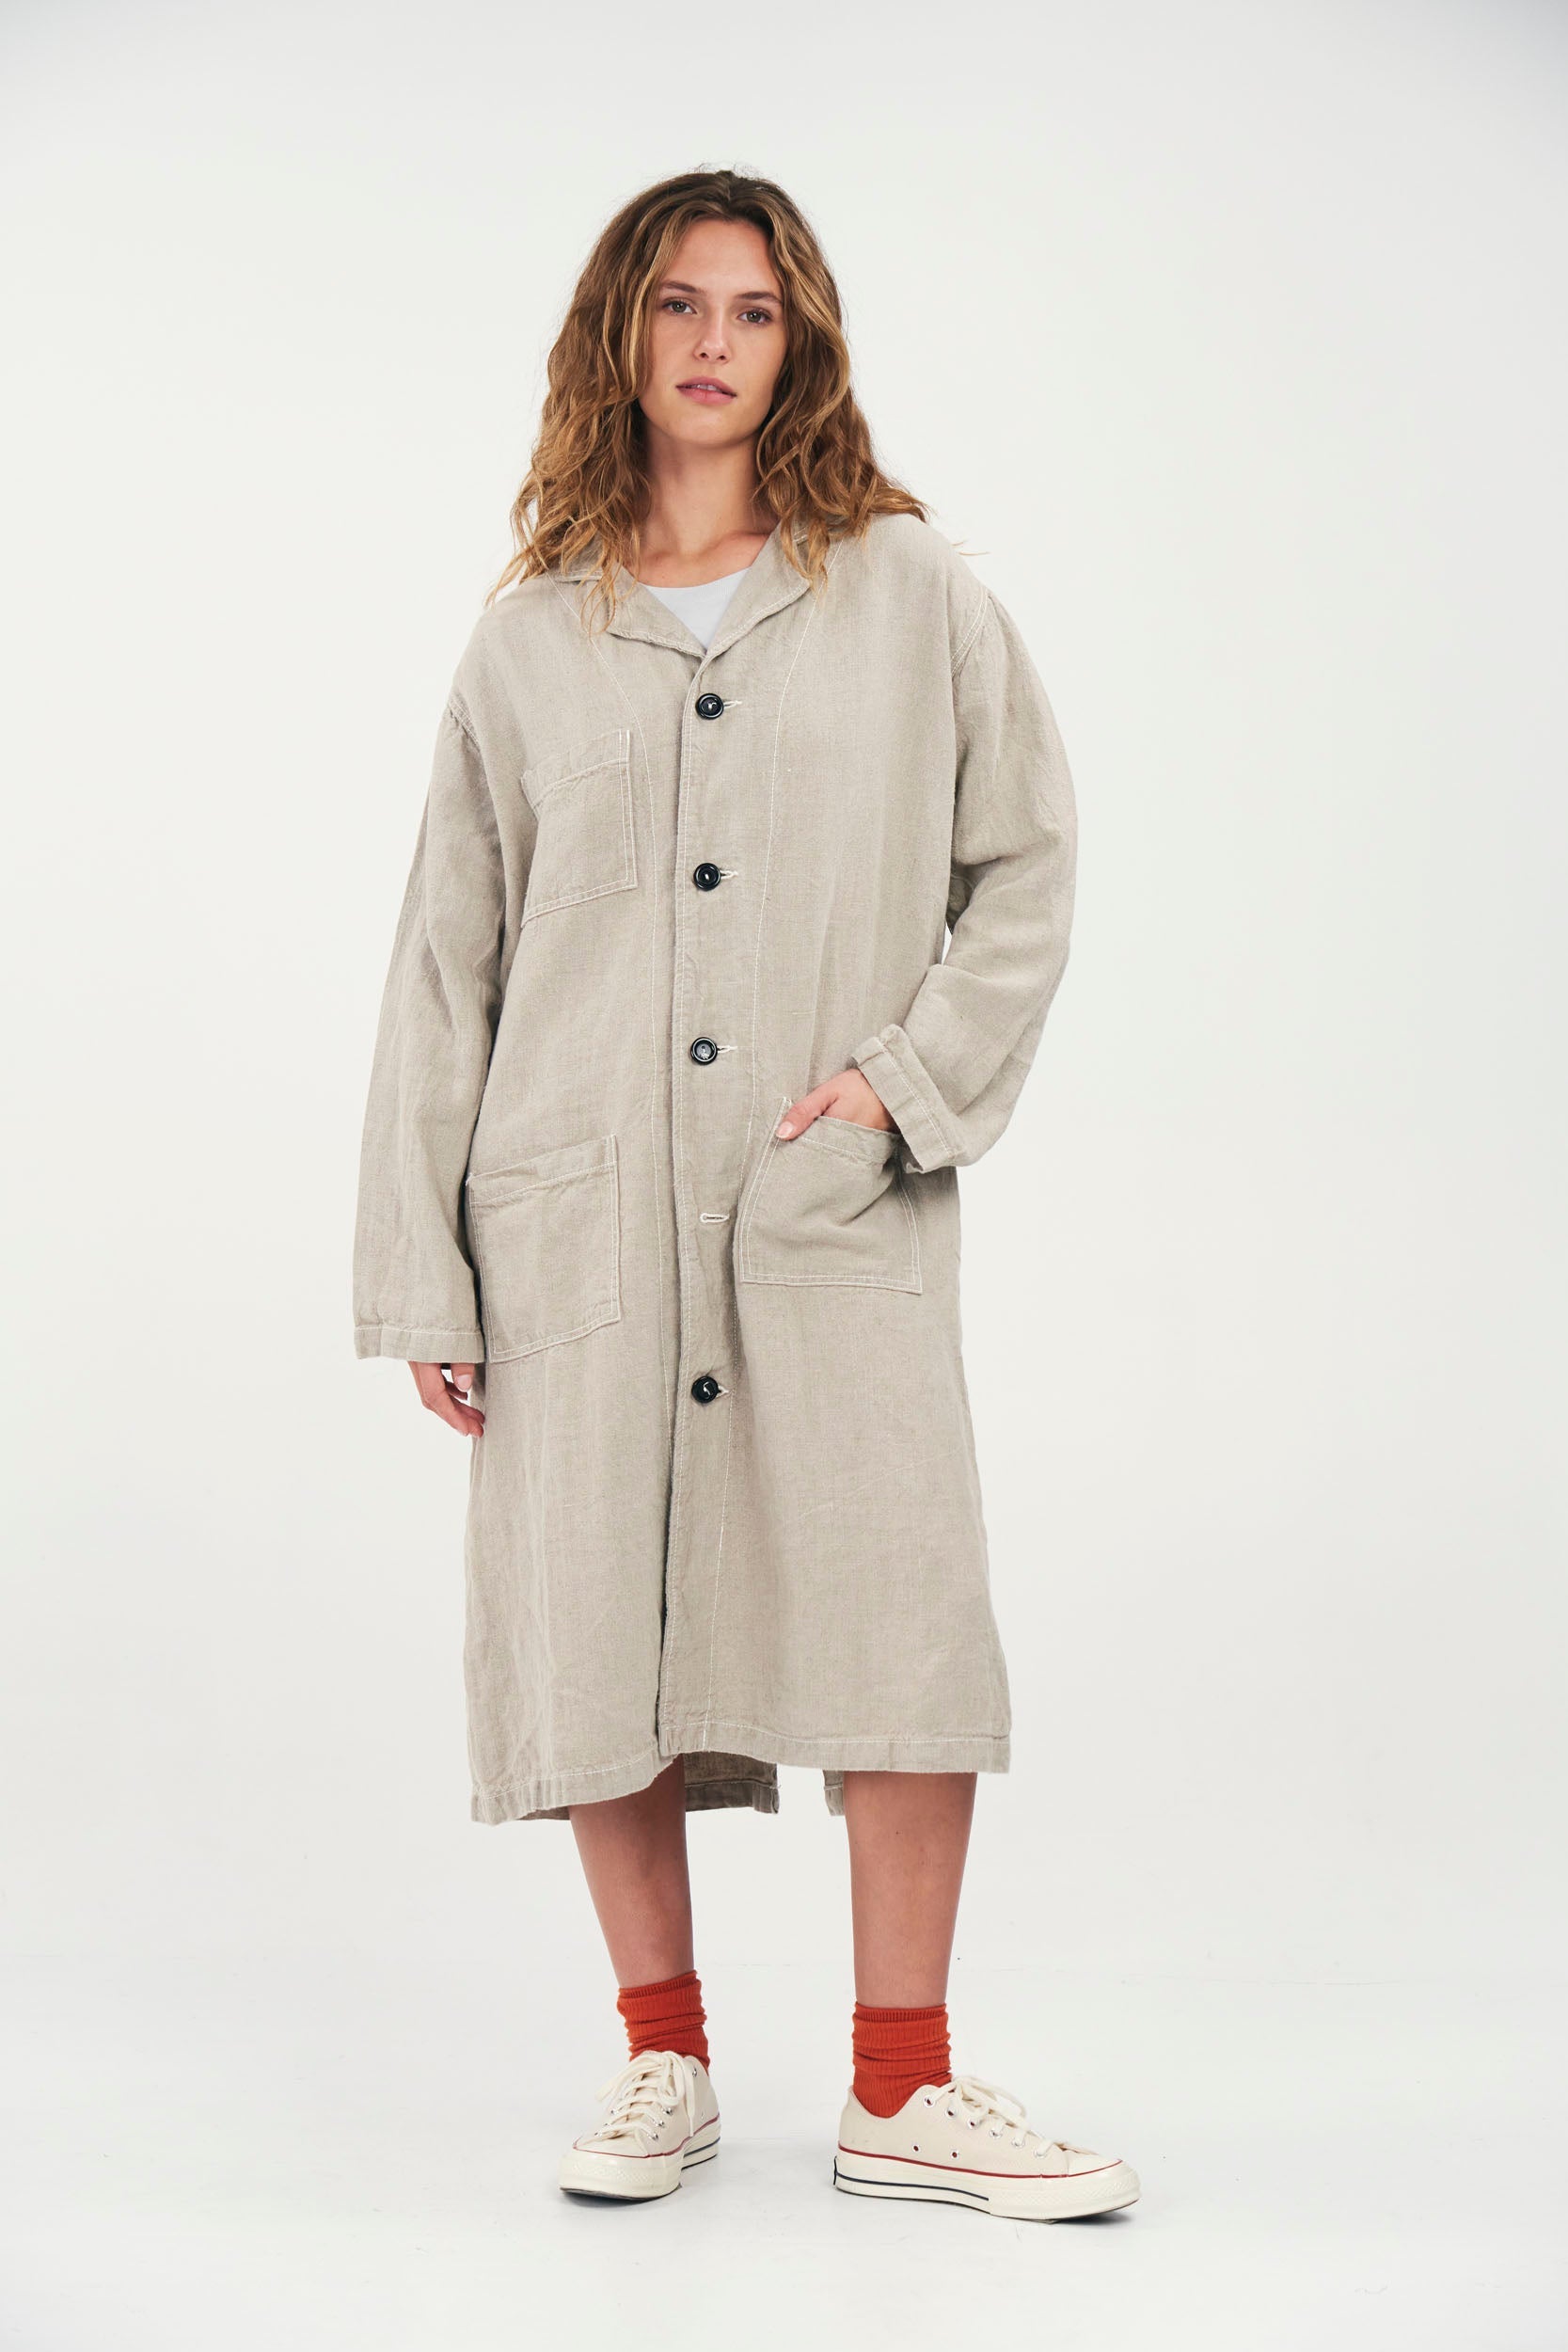 You The Brave - Linen Lab Coat - Reviving forgotten textiles into timeless masterpieces. Our ethical practices and up-cycling philosophy drive positive change. Based in LA, we excel in designing, sourcing, and manufacturing domestic goods, crafting luxury utilitarian collections. Express your style sustainably with authentic, American-made fashion and support our commitment to locally-produced goods.